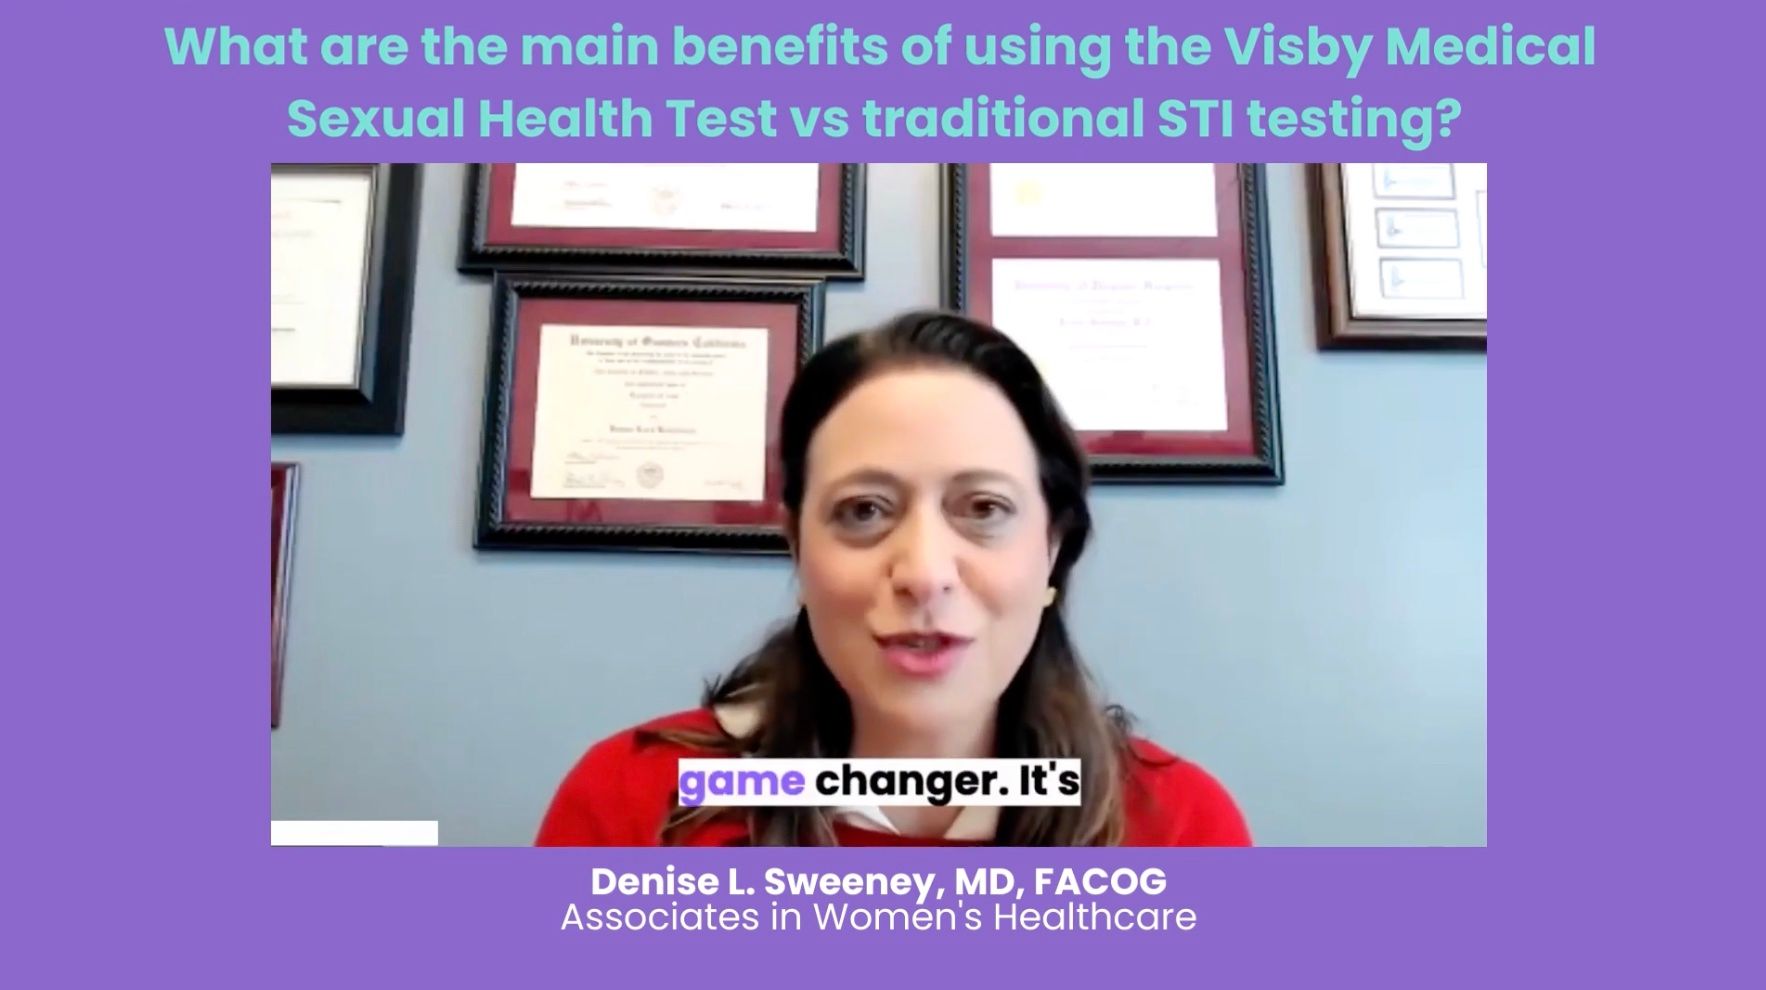 Benefits of the Visby Medical Sexual Health Test